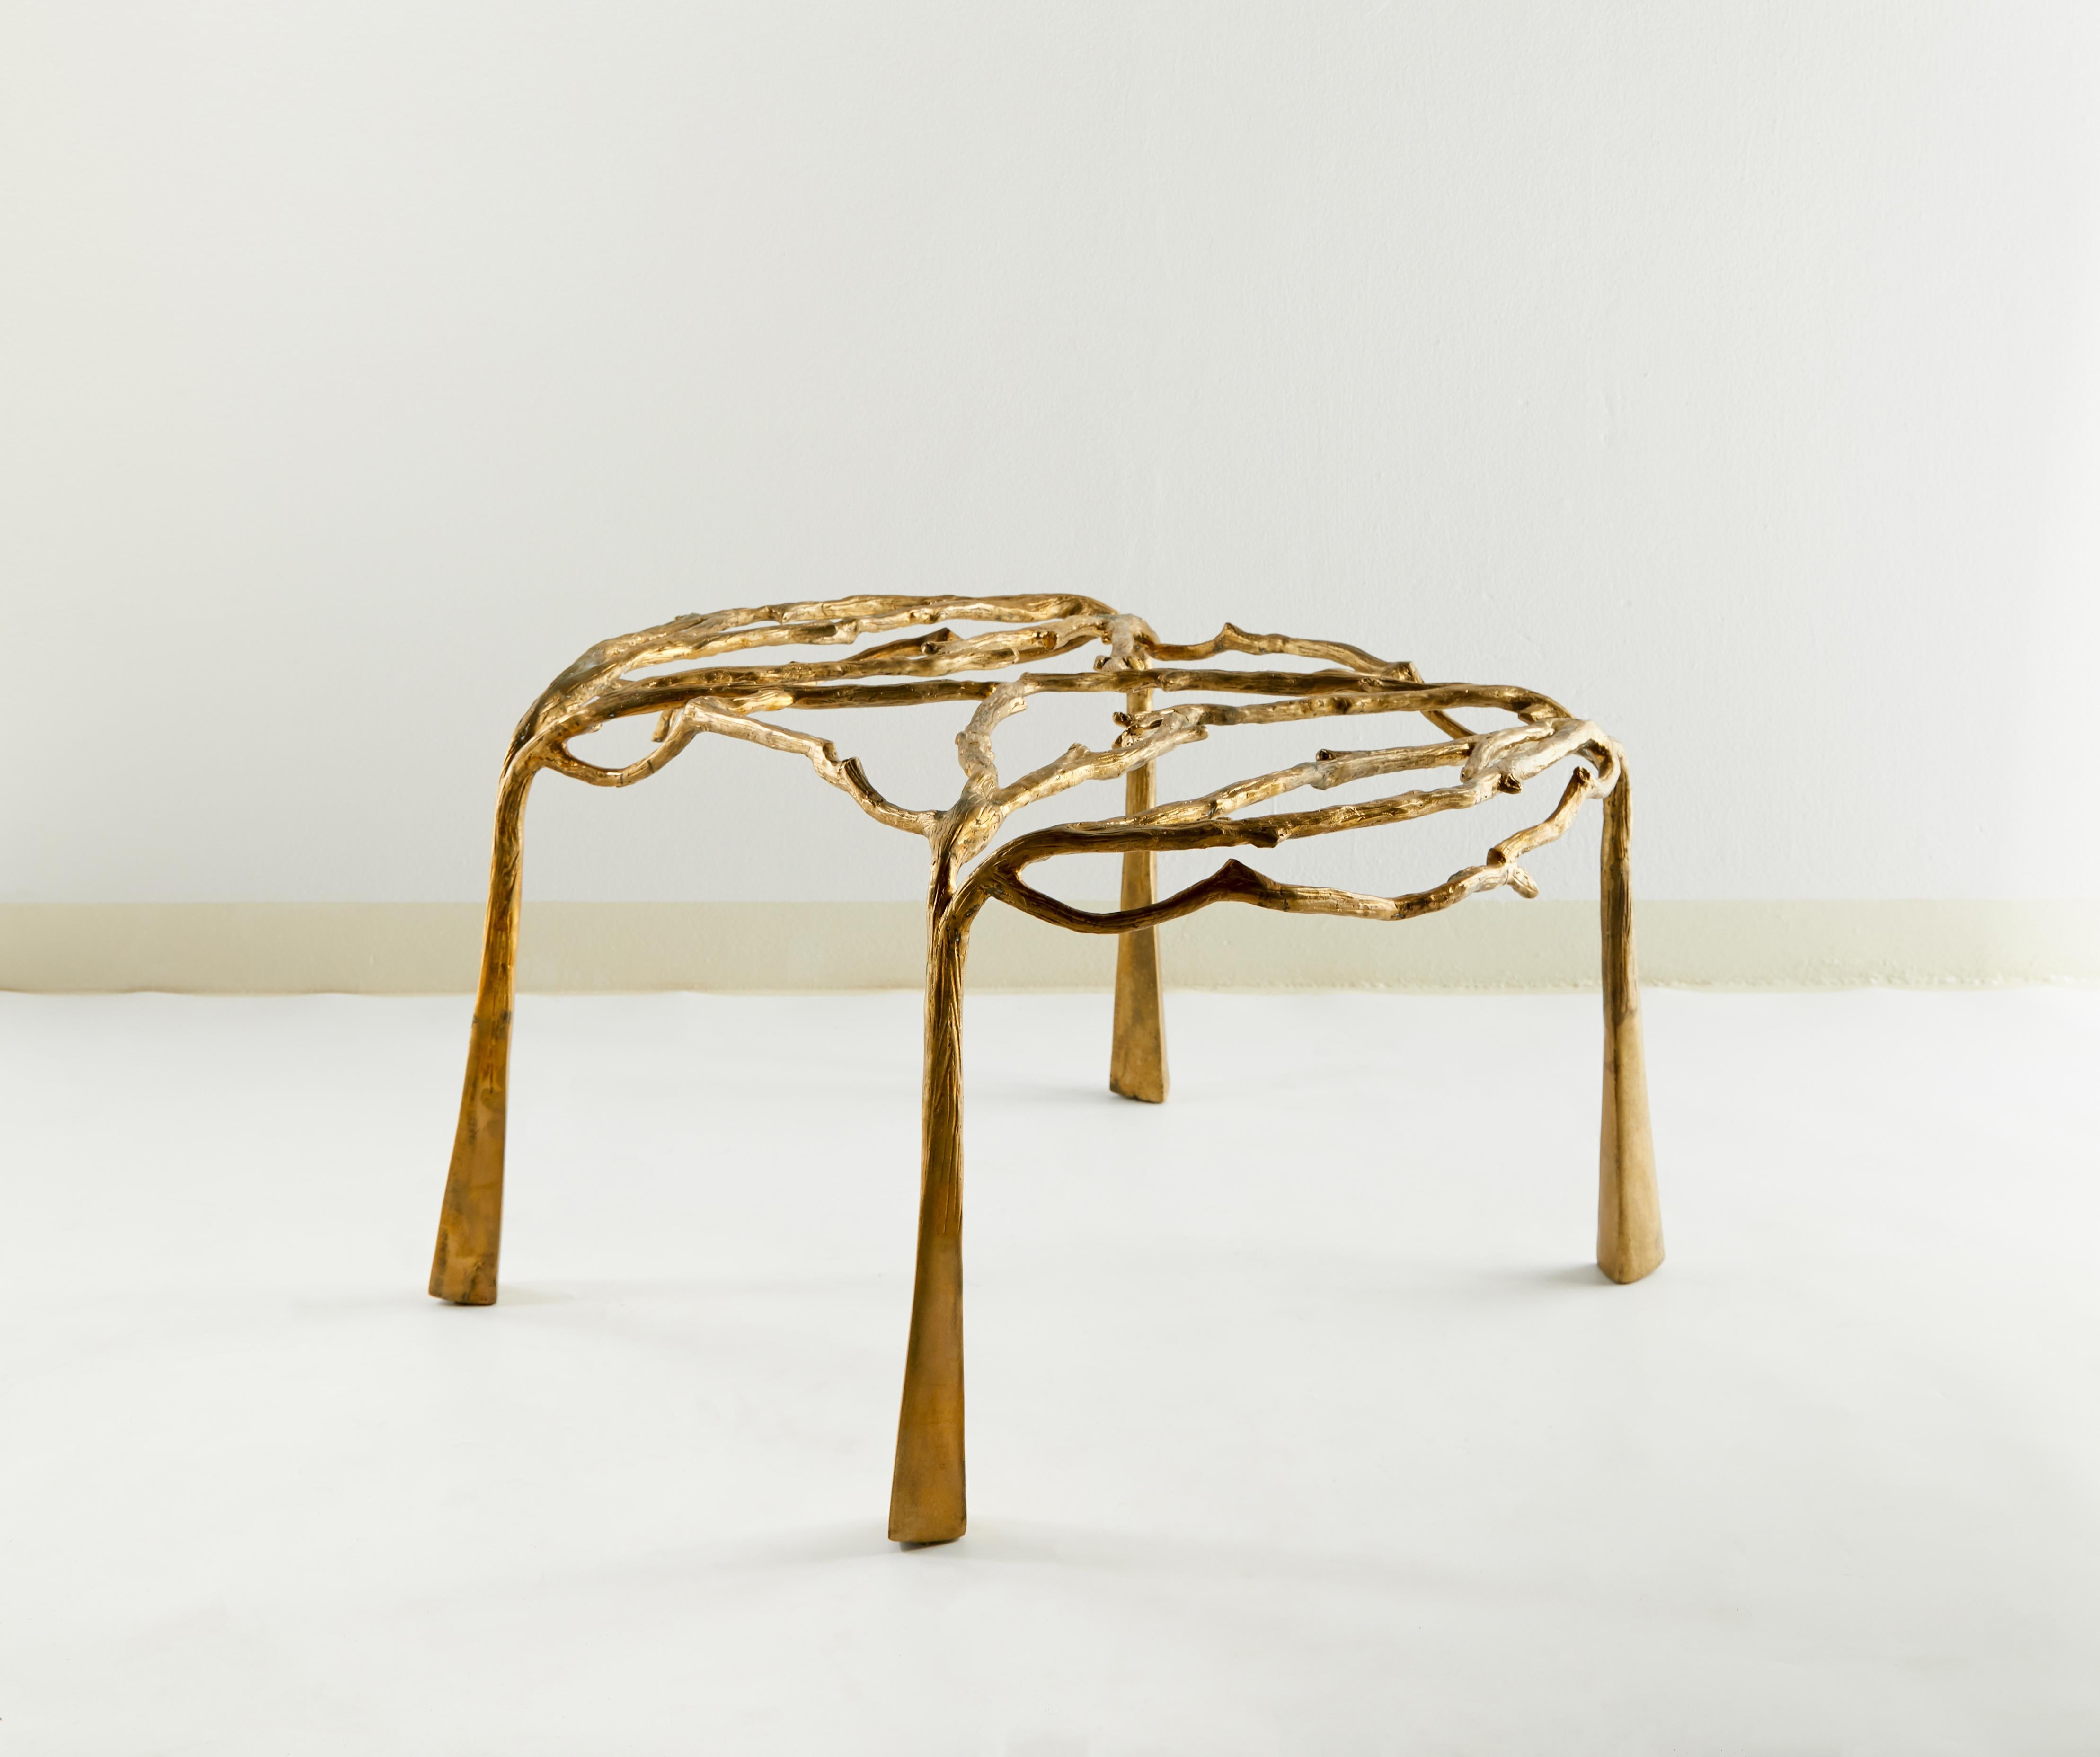 Brass cculpted coffee table, complexity, Misaya
Dimensions: W 66 x L 77 x H 46 cm
Hand-sculpted brass table.
Sold without glasstop.